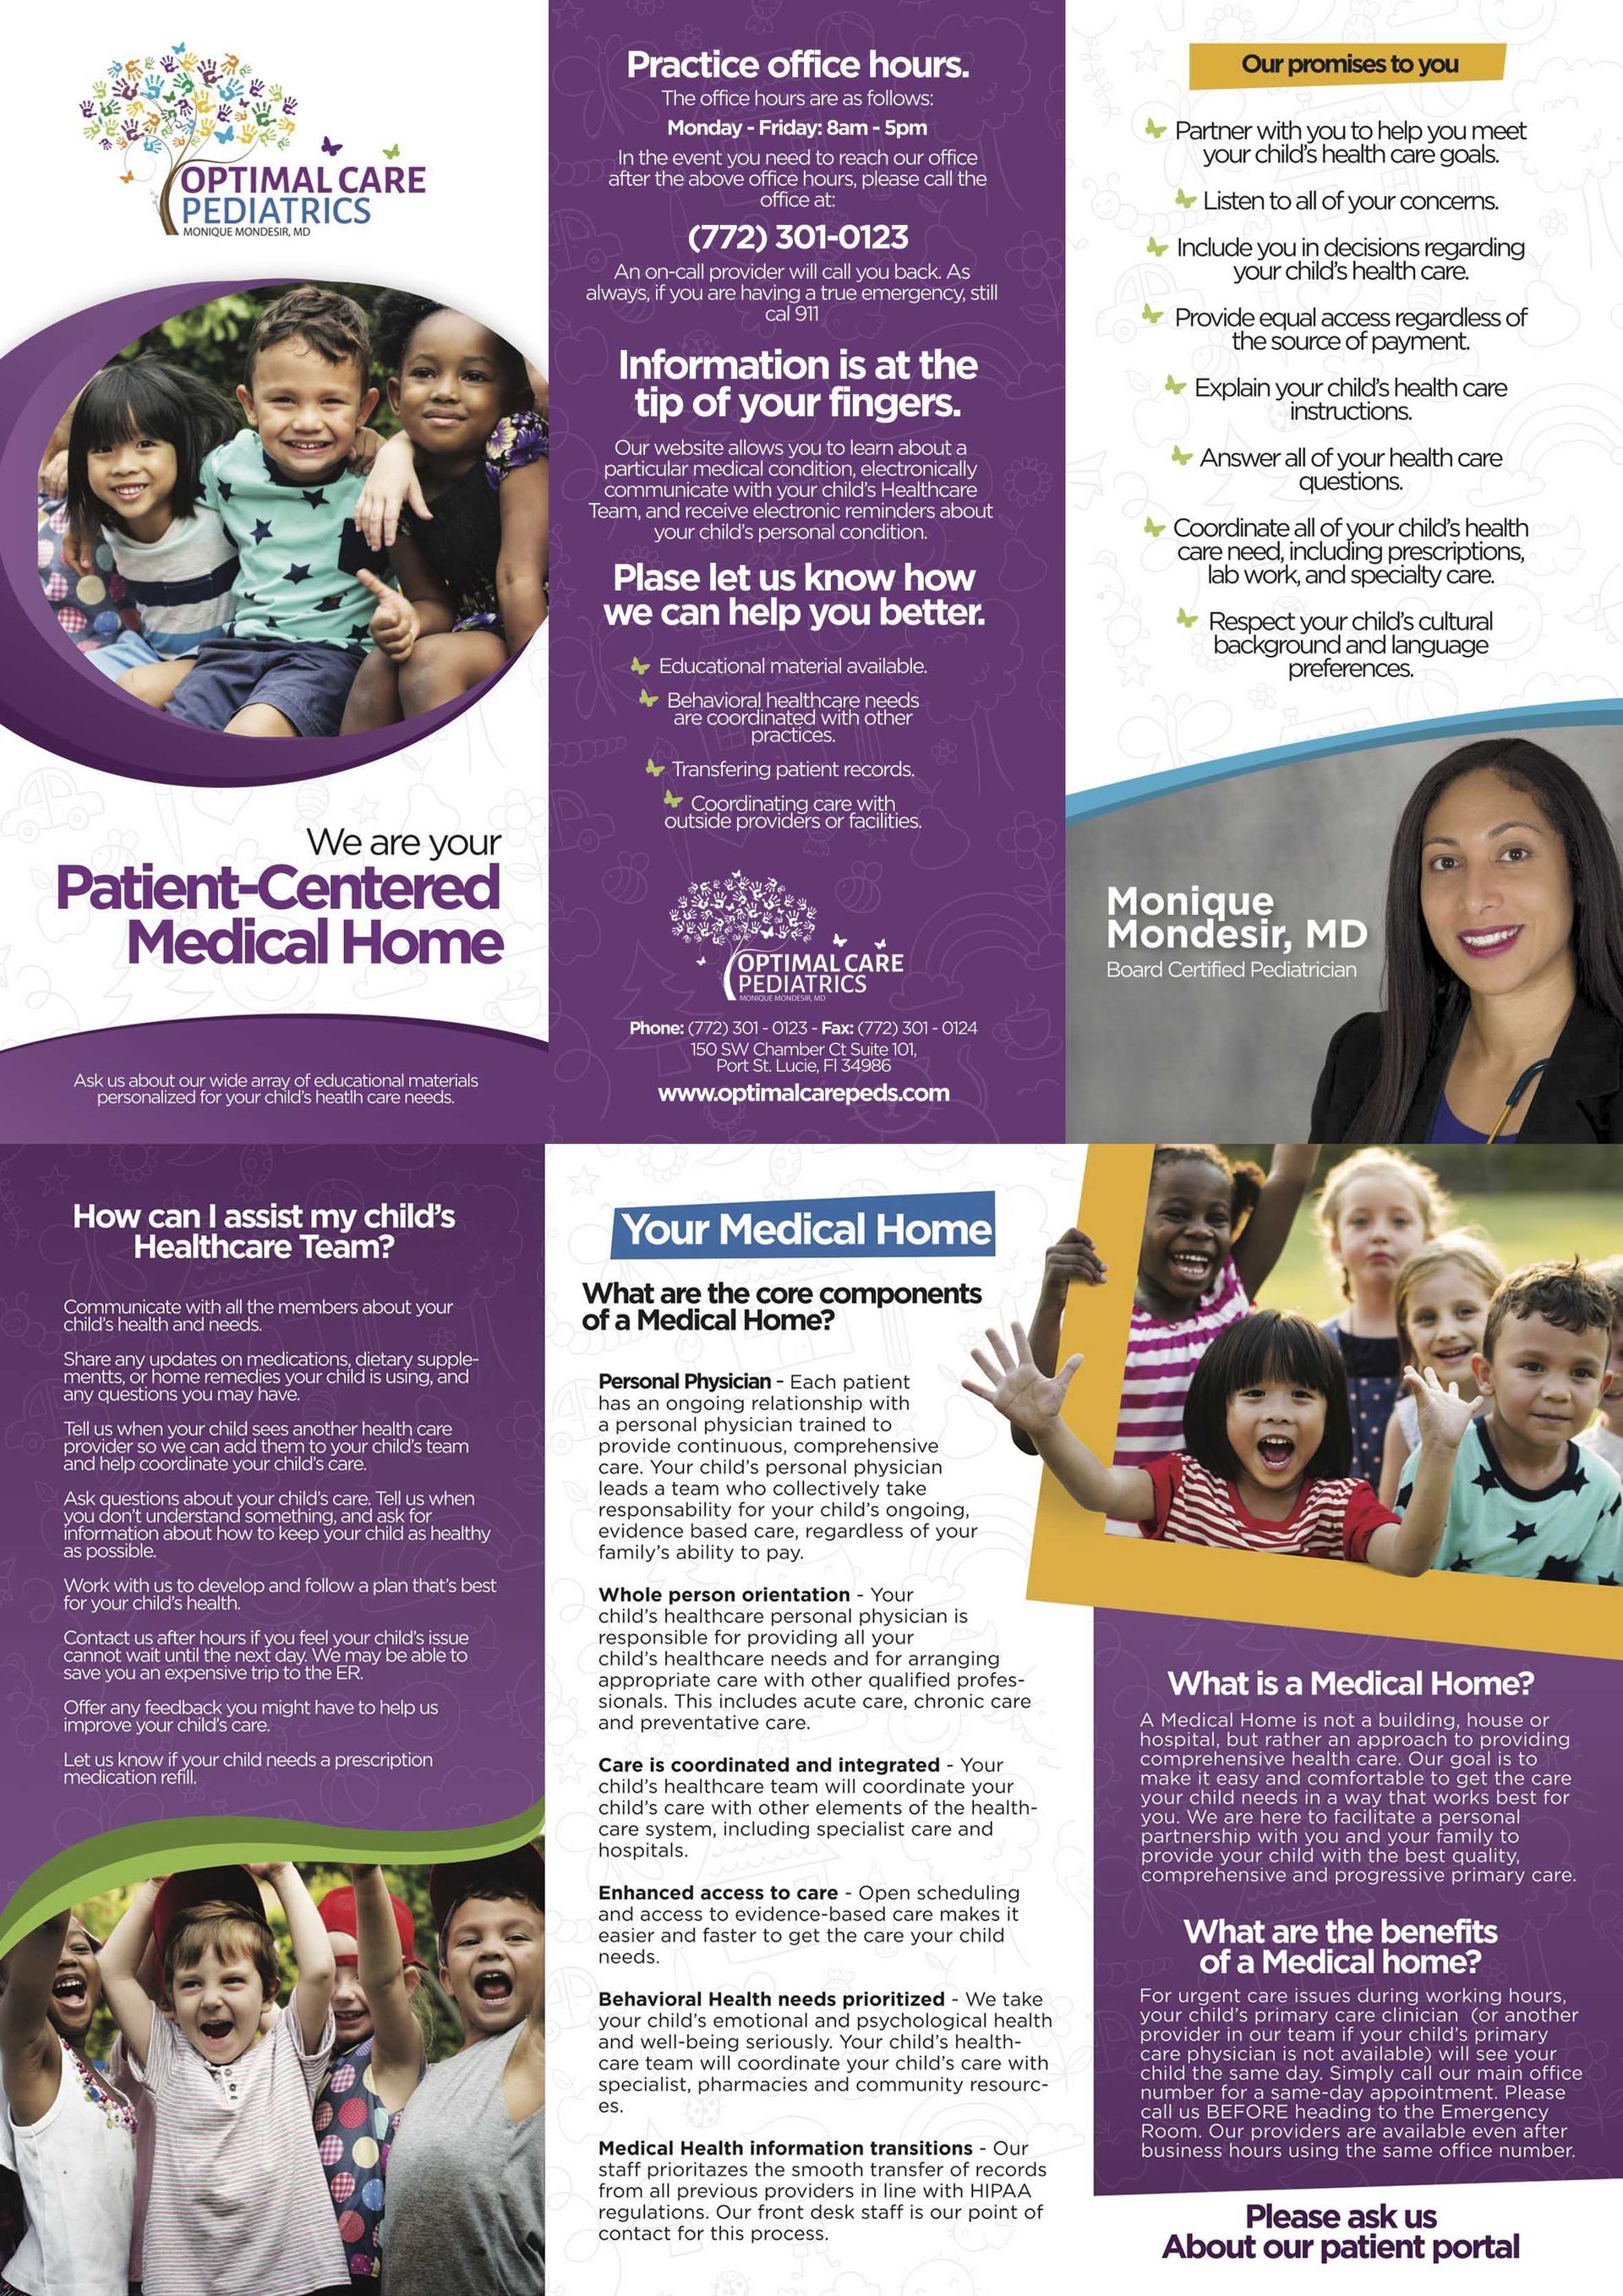 Optimal Care Pediatrics Brochure - We are your patient-centered medical home